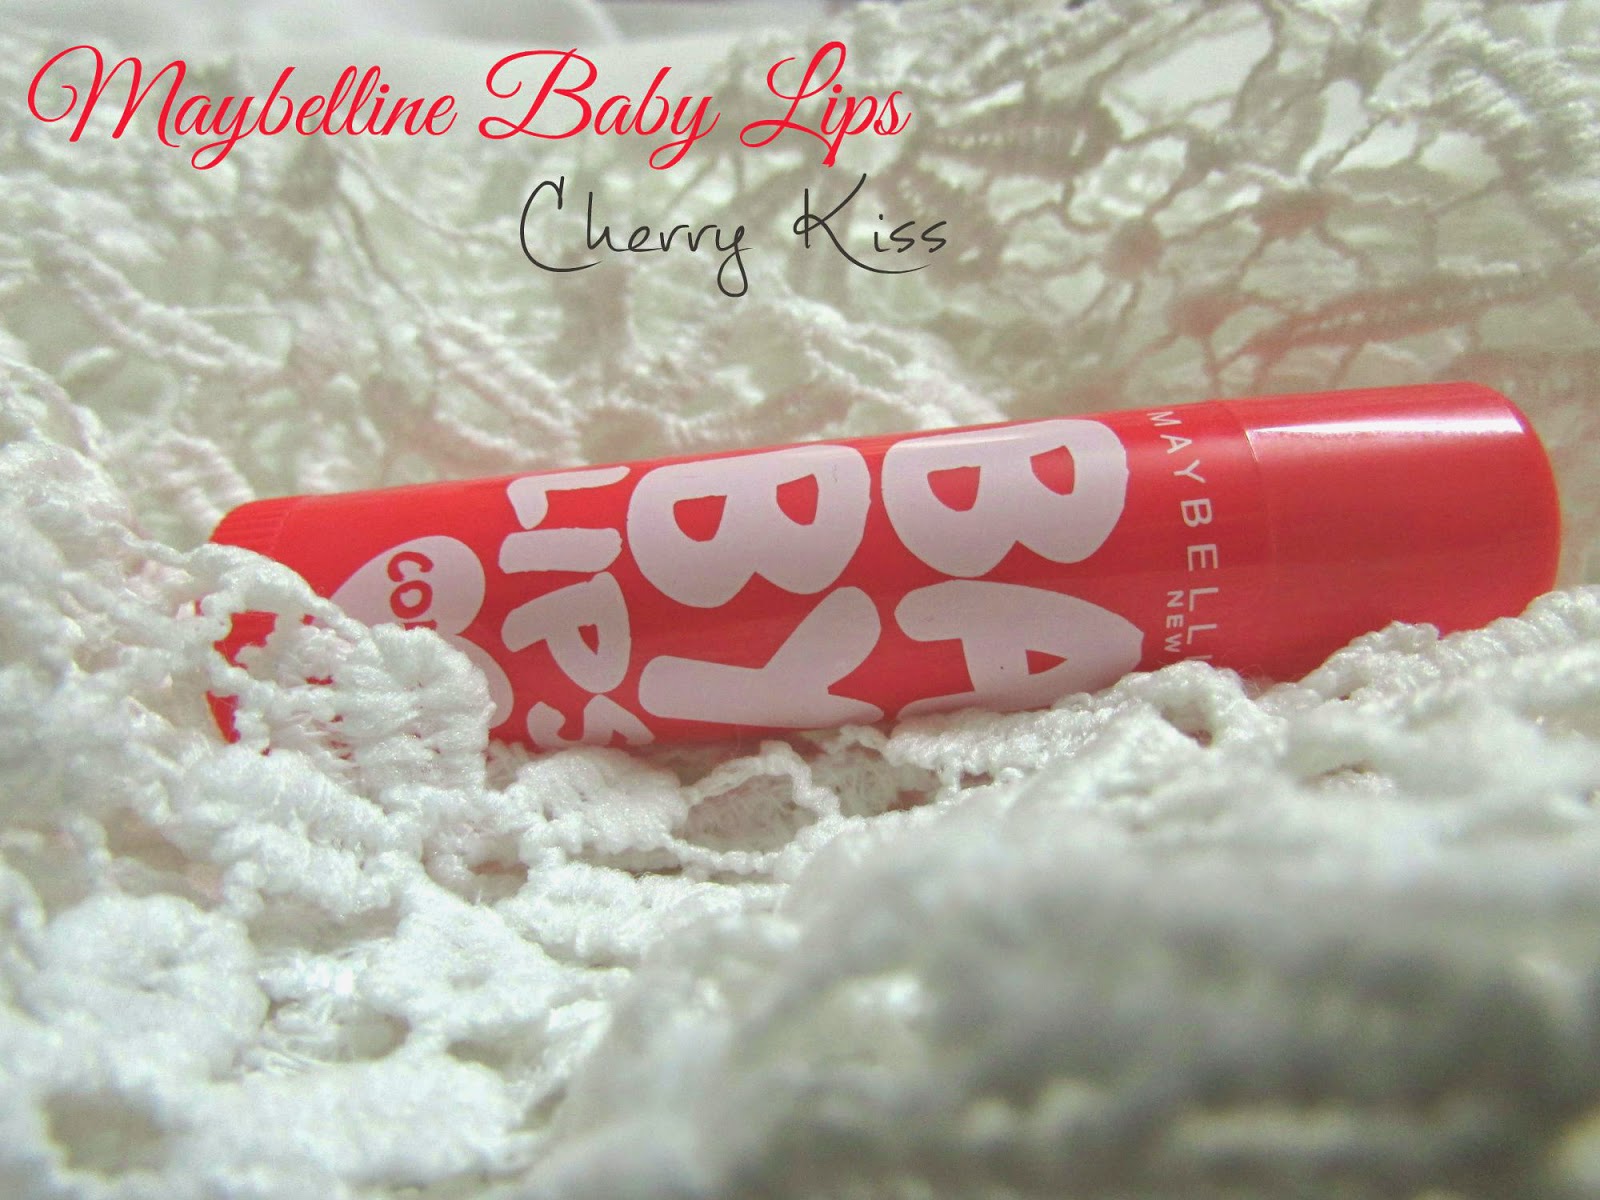 Baby lips in india,maybelline baby lips cost in india,maybelline baby lips review,maybelline baby lips review india